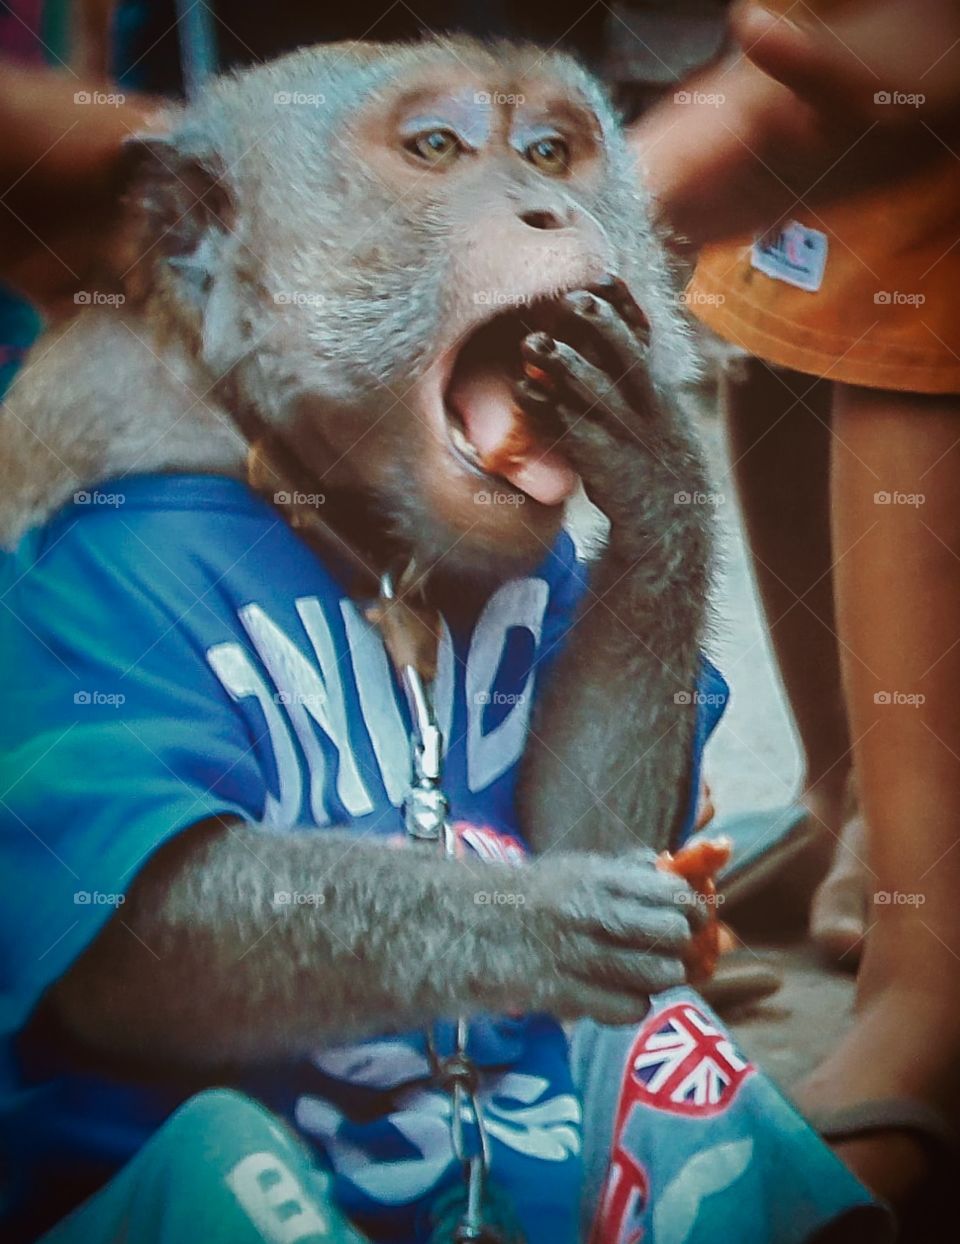 The expression of the monkey